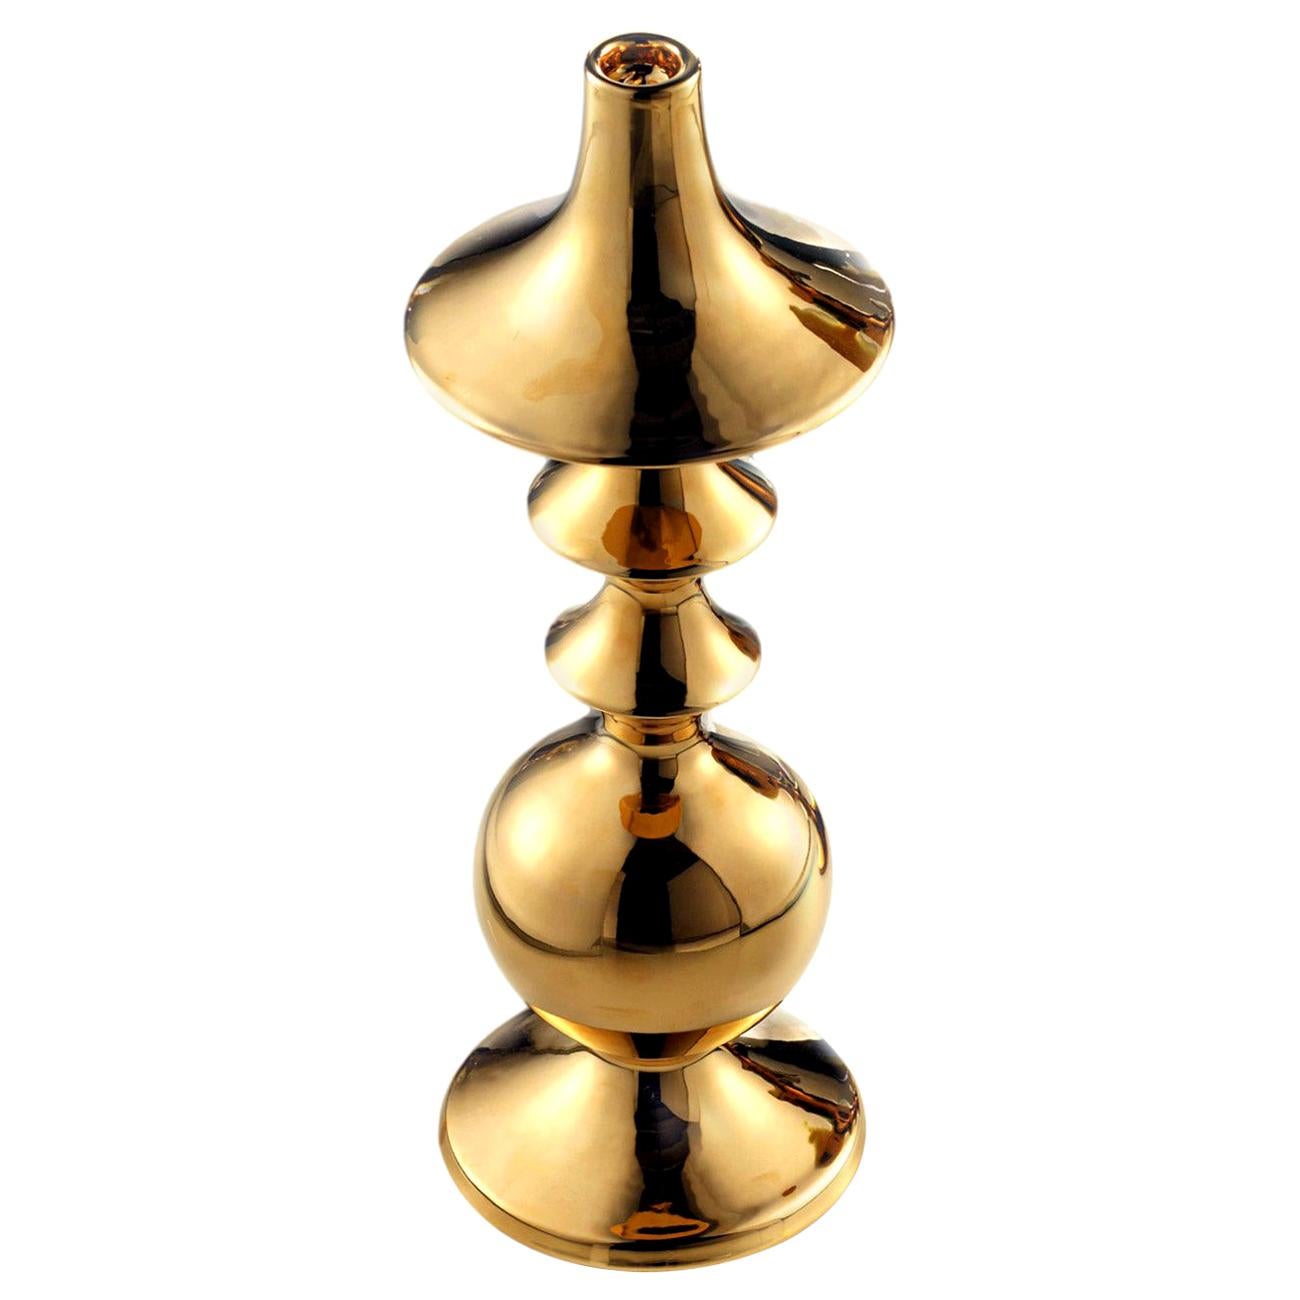 Ceramic Vase "BRIX" Handcrafted in 24-Karat Gold by Gabriella B. Made in Italy